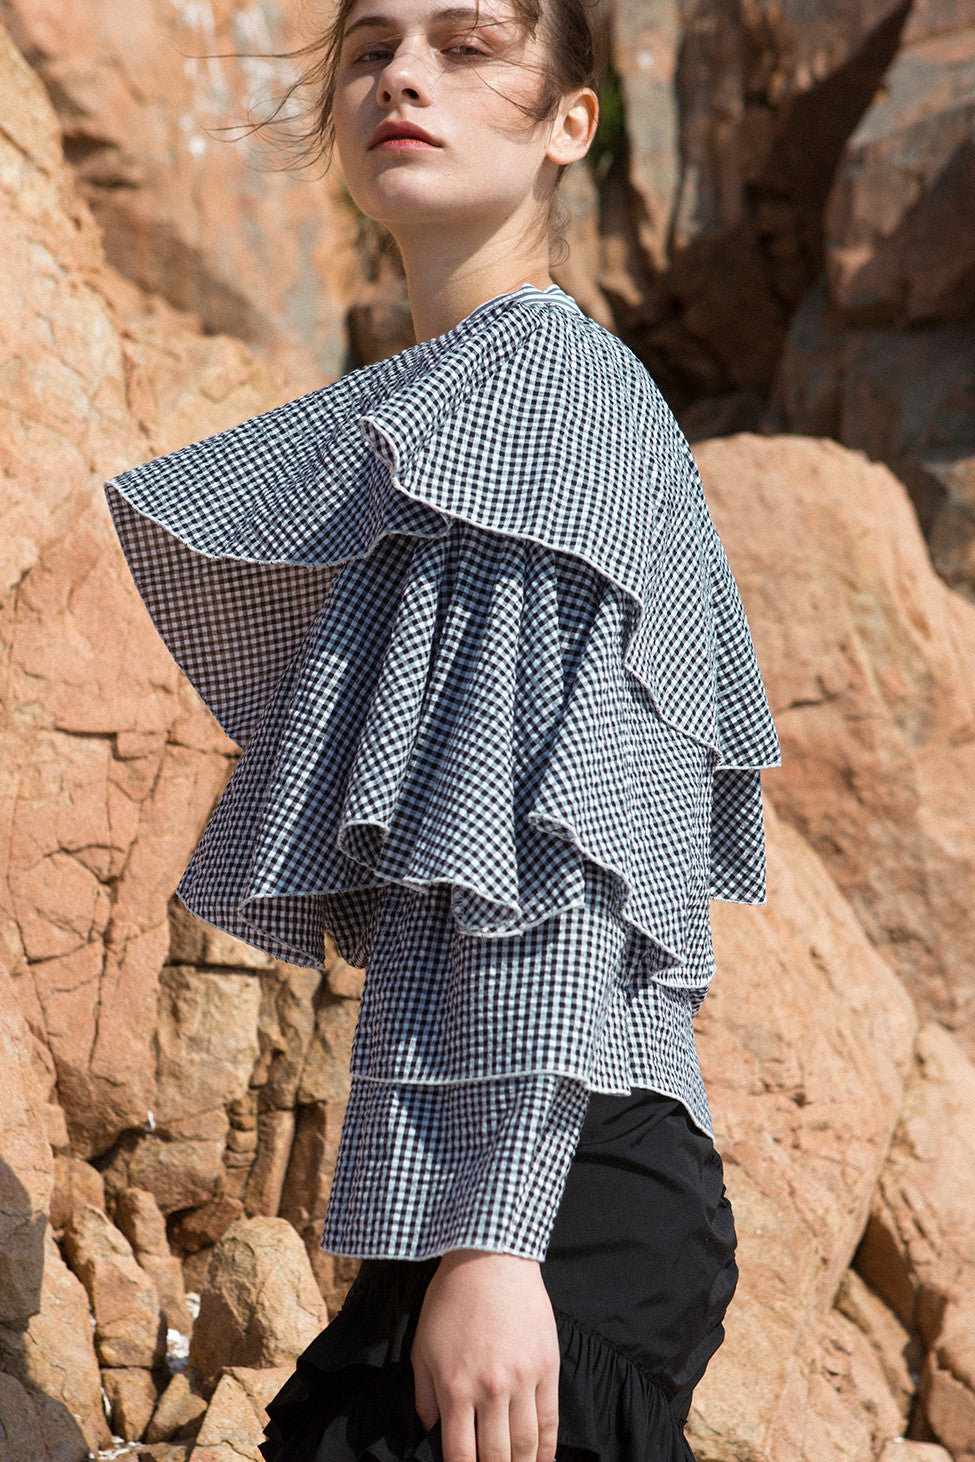 Architectural top from black gingham stripes. Asymmetric neckline with self tie detail at side neck. Exaggerated ruffle panel at one shoulder sleeve. 